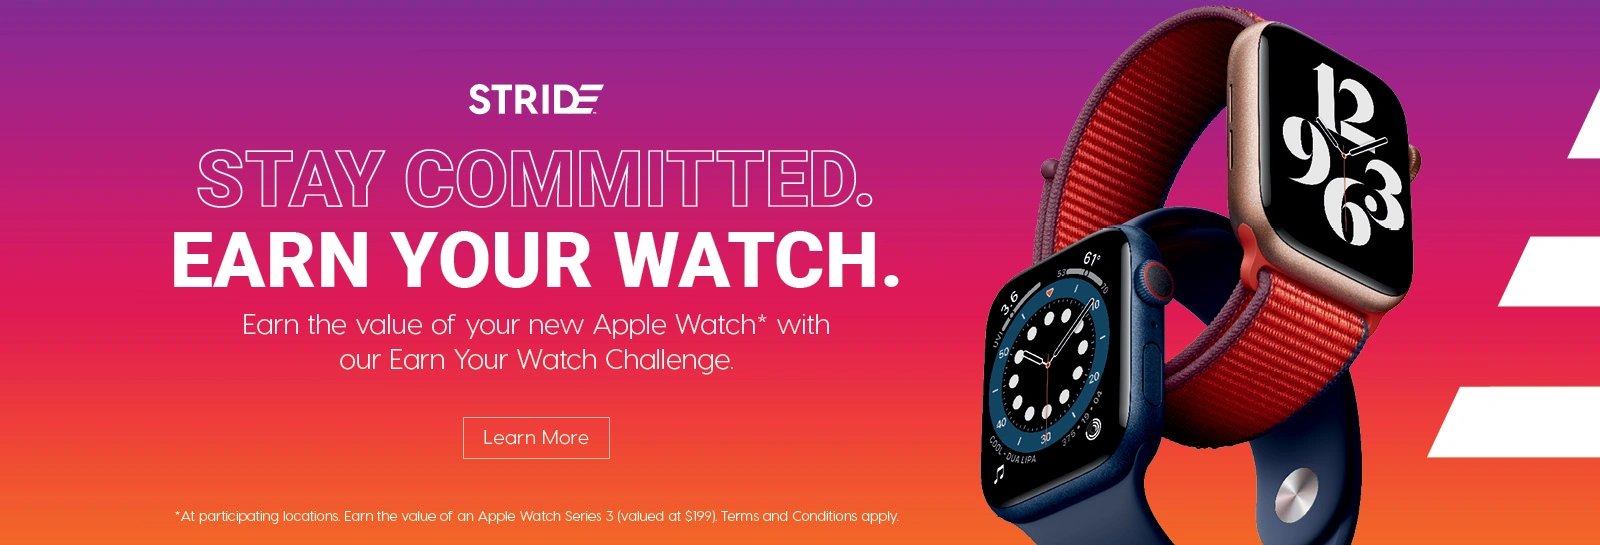 Brand-Page-Banners-Apple-Watch-EYW6